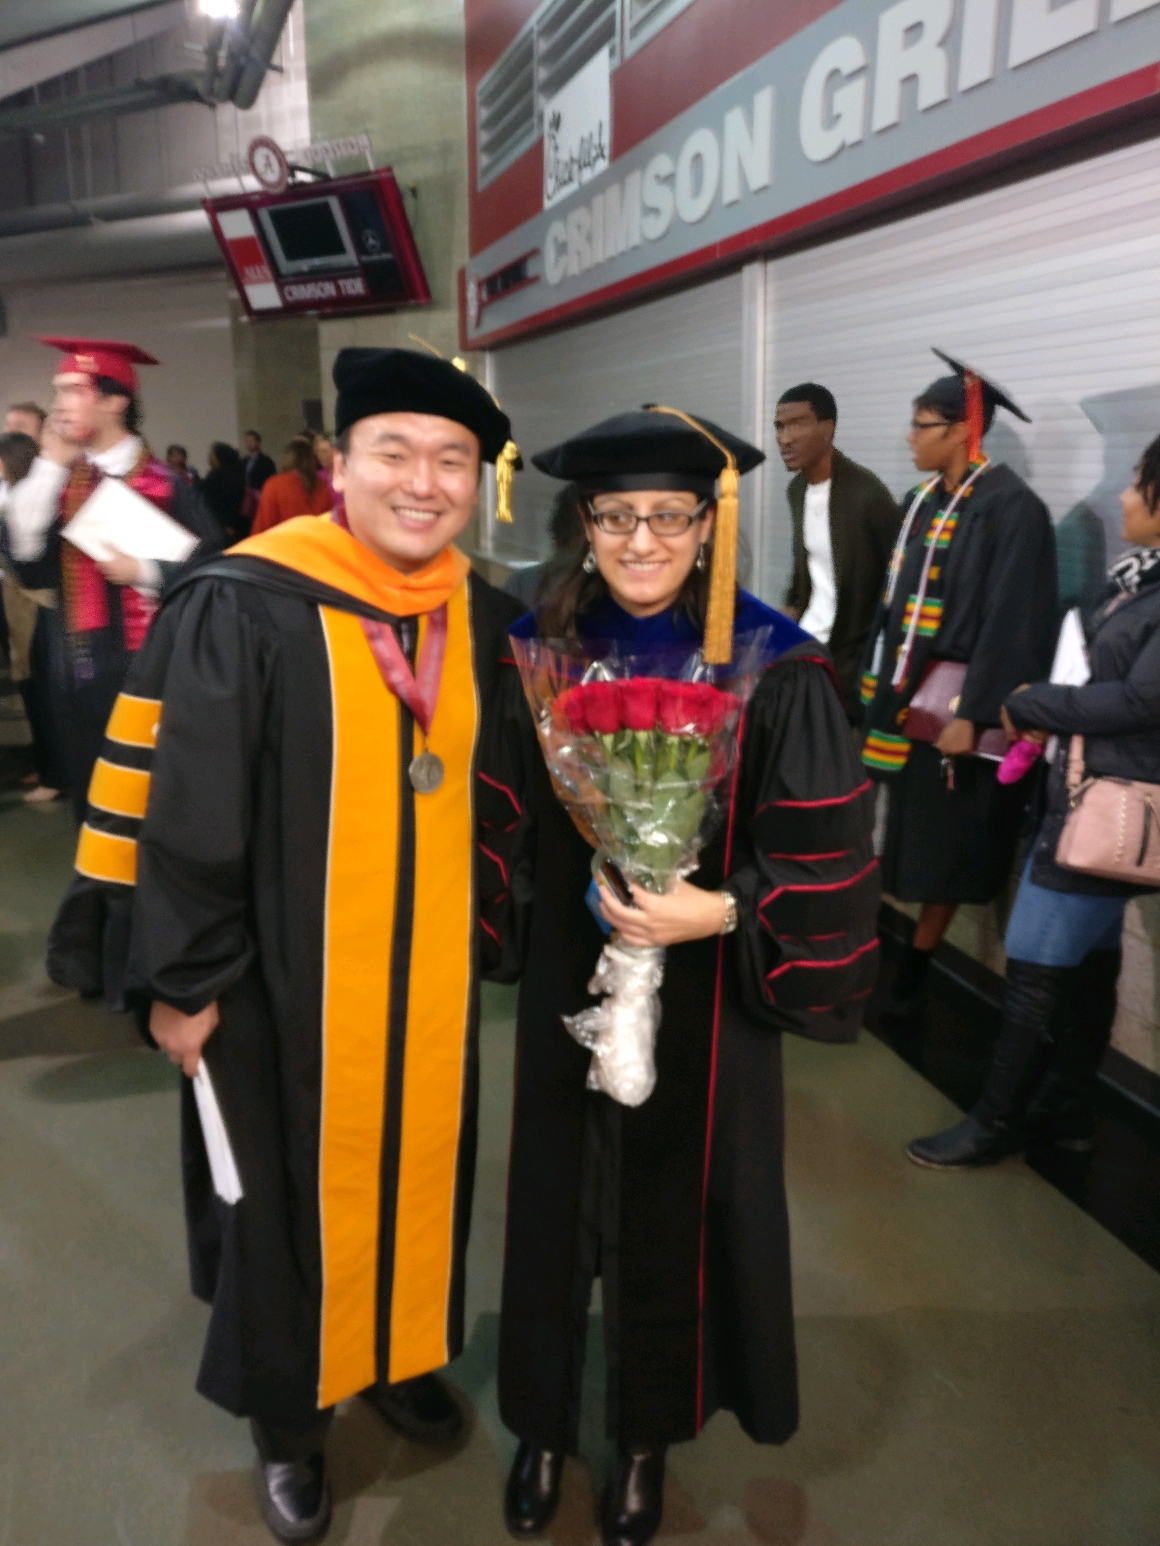 A male professor in academic regalia standing next to a female student in academic regalia holding a bouquet of red roses